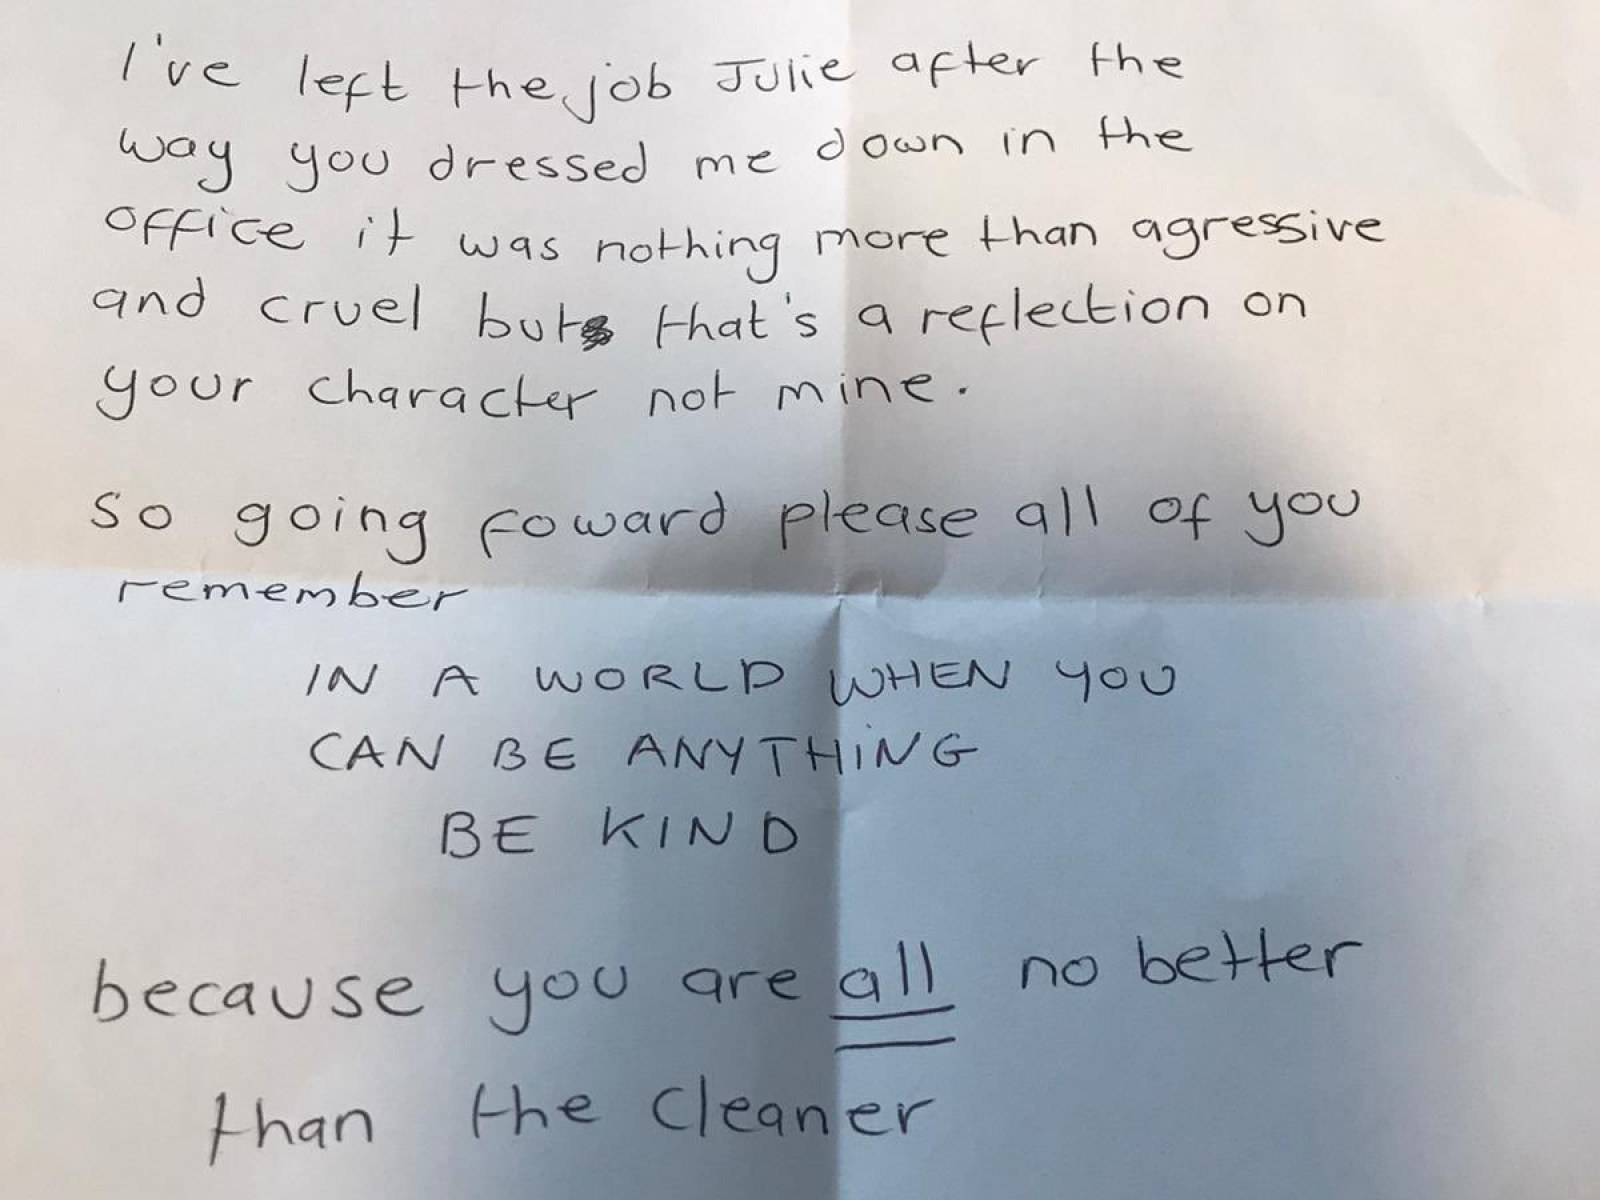 Cleaner S Resignation Letter To Awful Manager Goes Viral